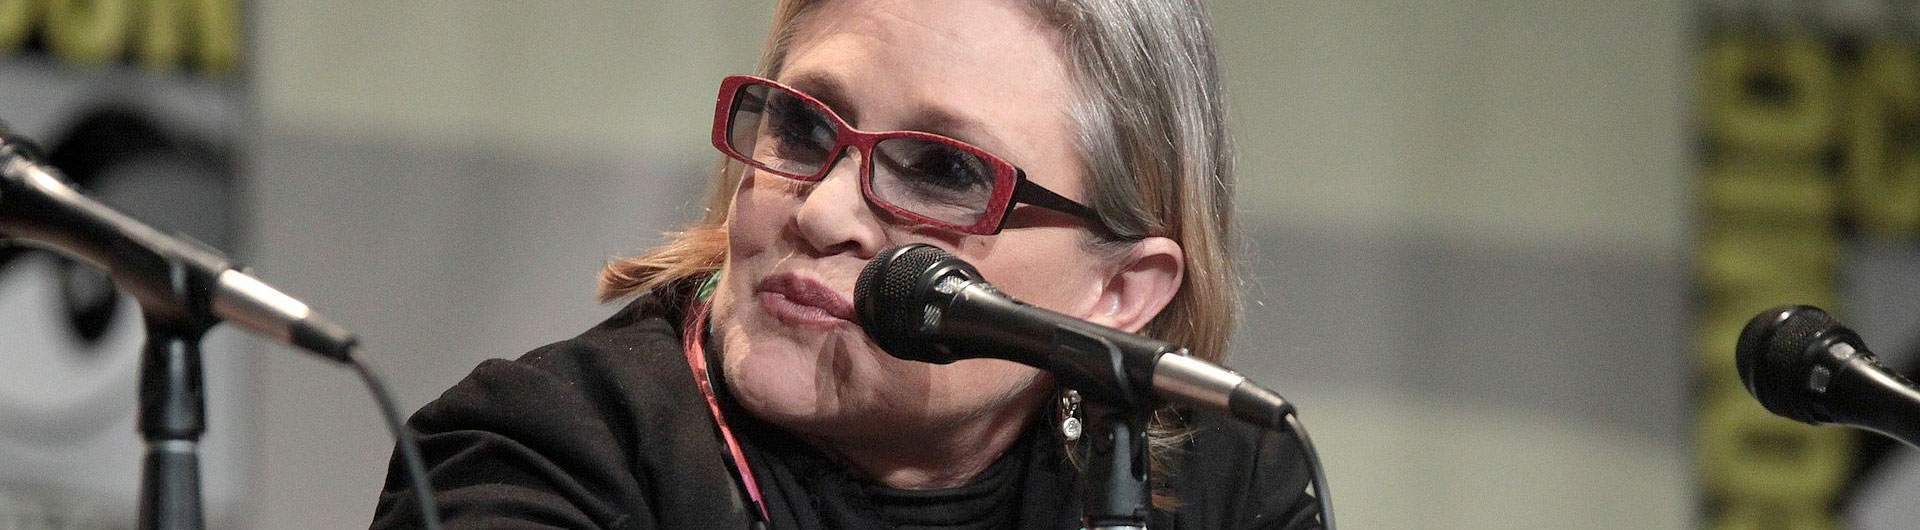 By Gage Skidmore from Peoria, AZ, United States of America - Carrie Fisher, CC BY-SA 2.0, https://commons.wikimedia.org/w/index.php?curid=49291802